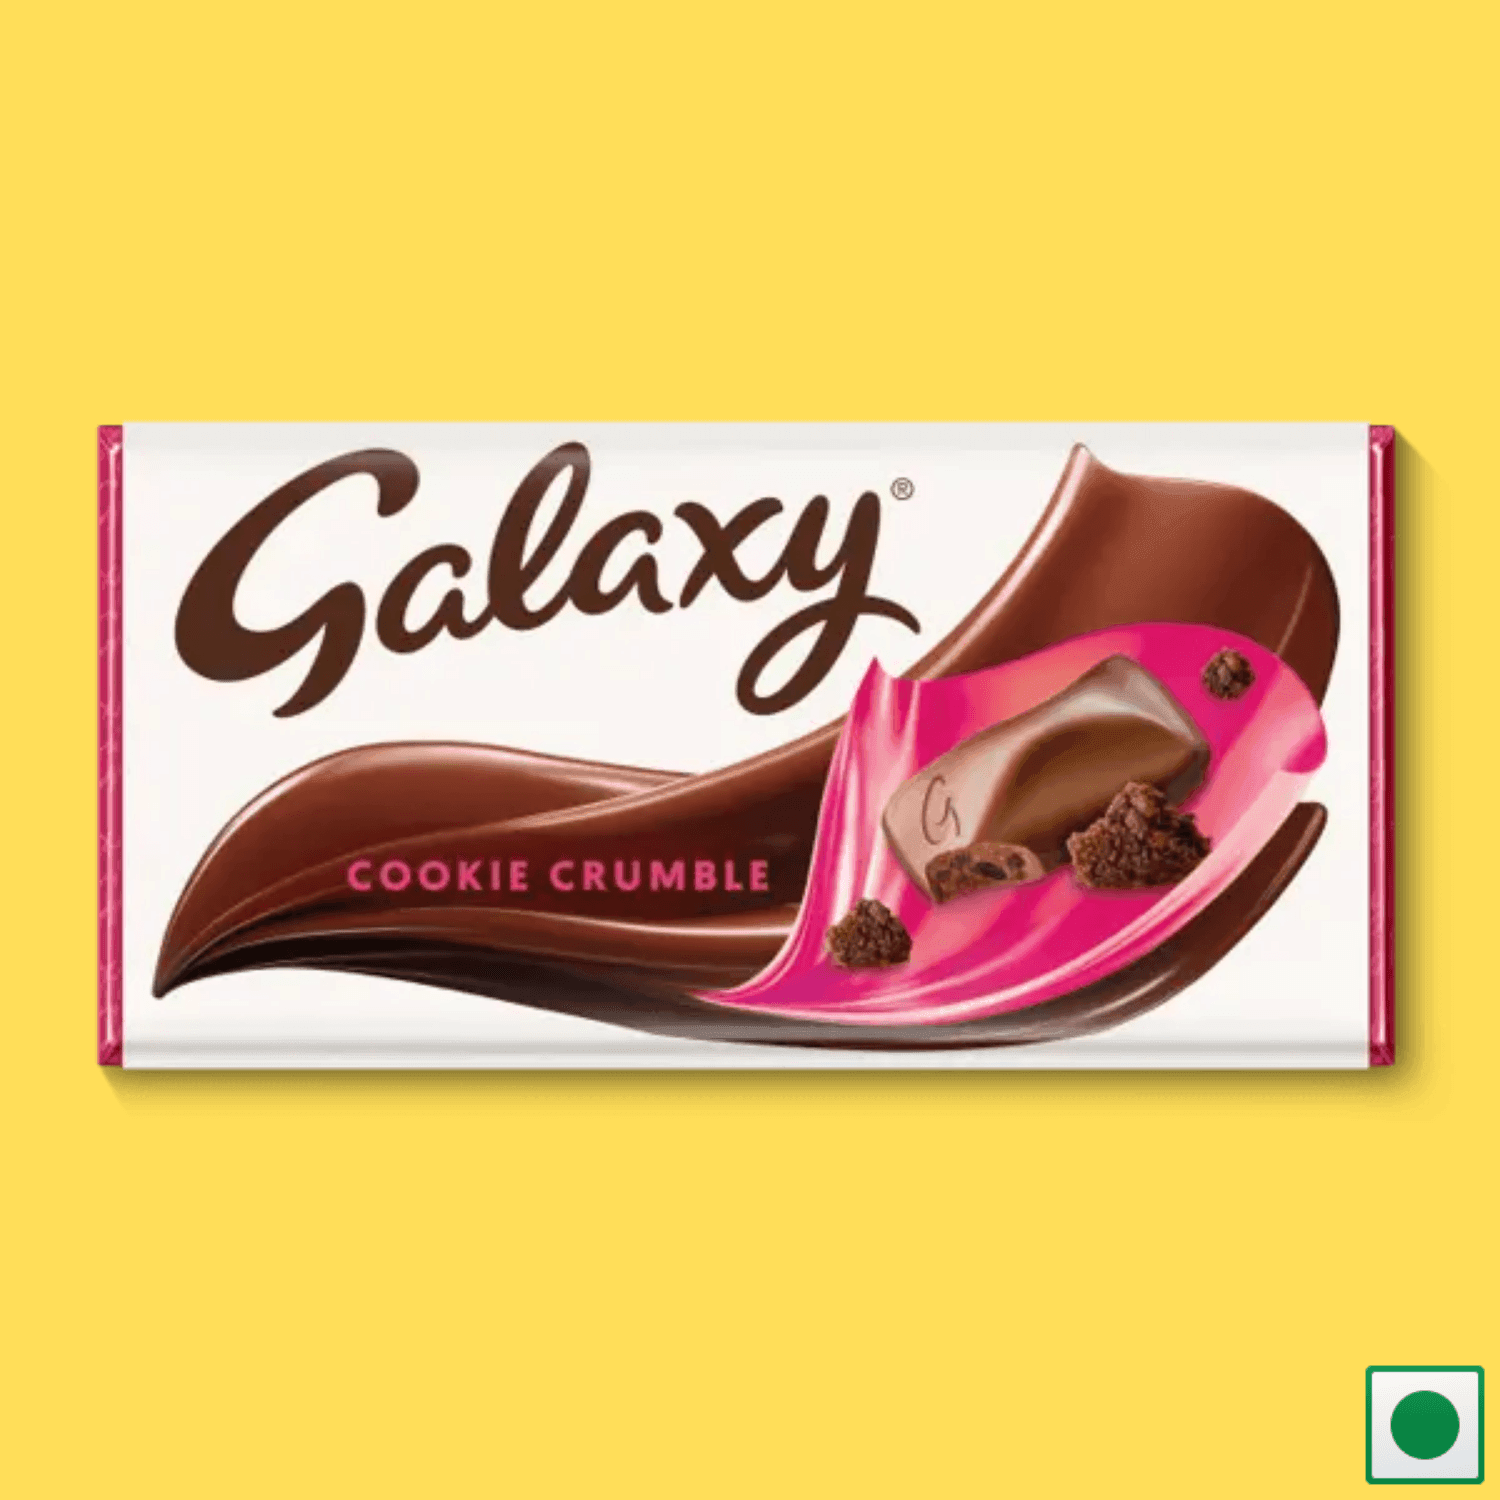 Galaxy® Cookie Crumble Chocolate Block, 114g (Imported) - Super 7 Mart